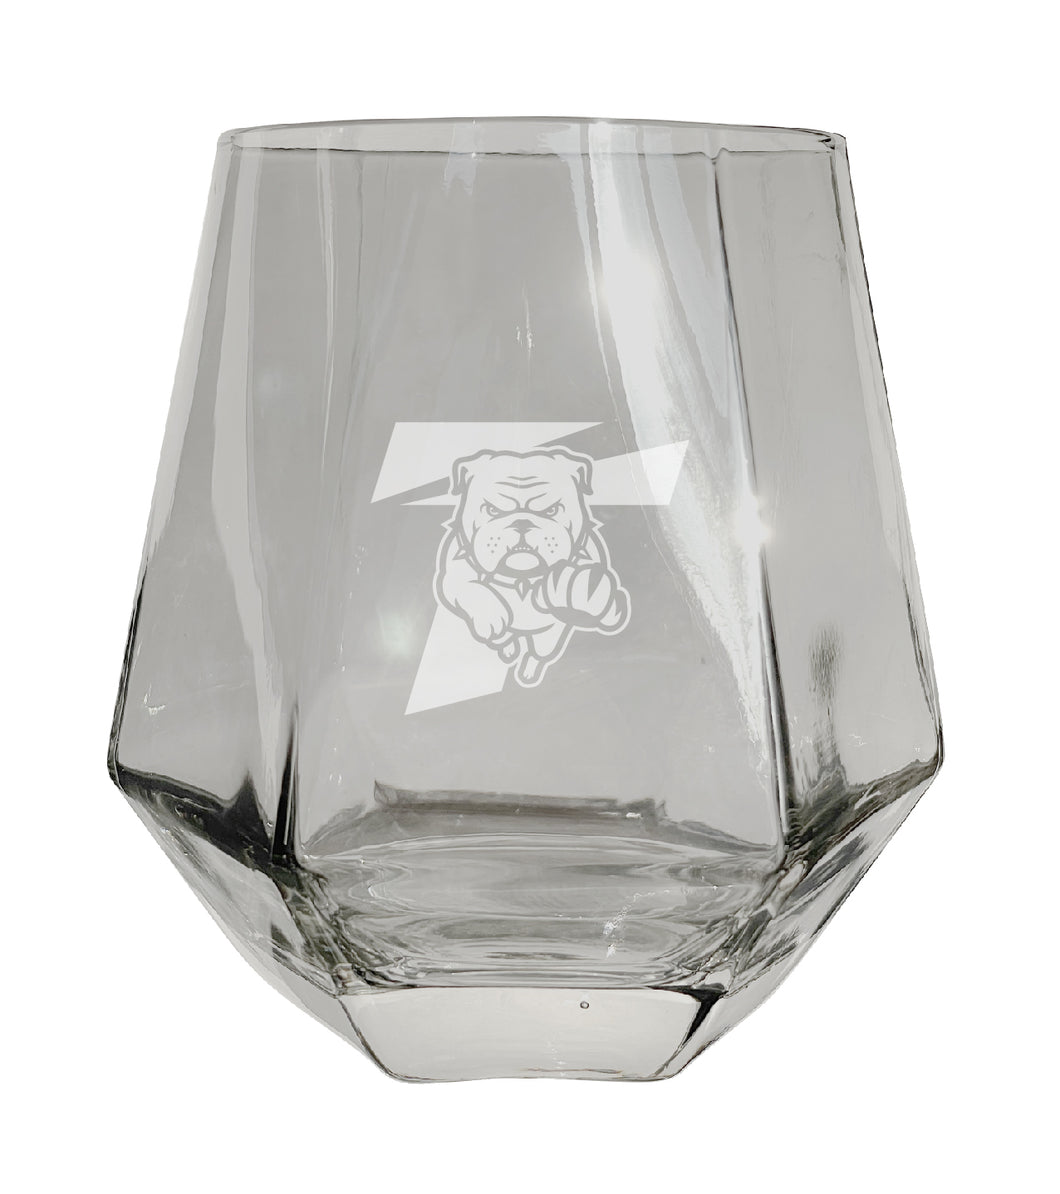 Truman State University Tigers Etched Diamond Cut 10 oz Stemless Wine Glass - NCAA Licensed